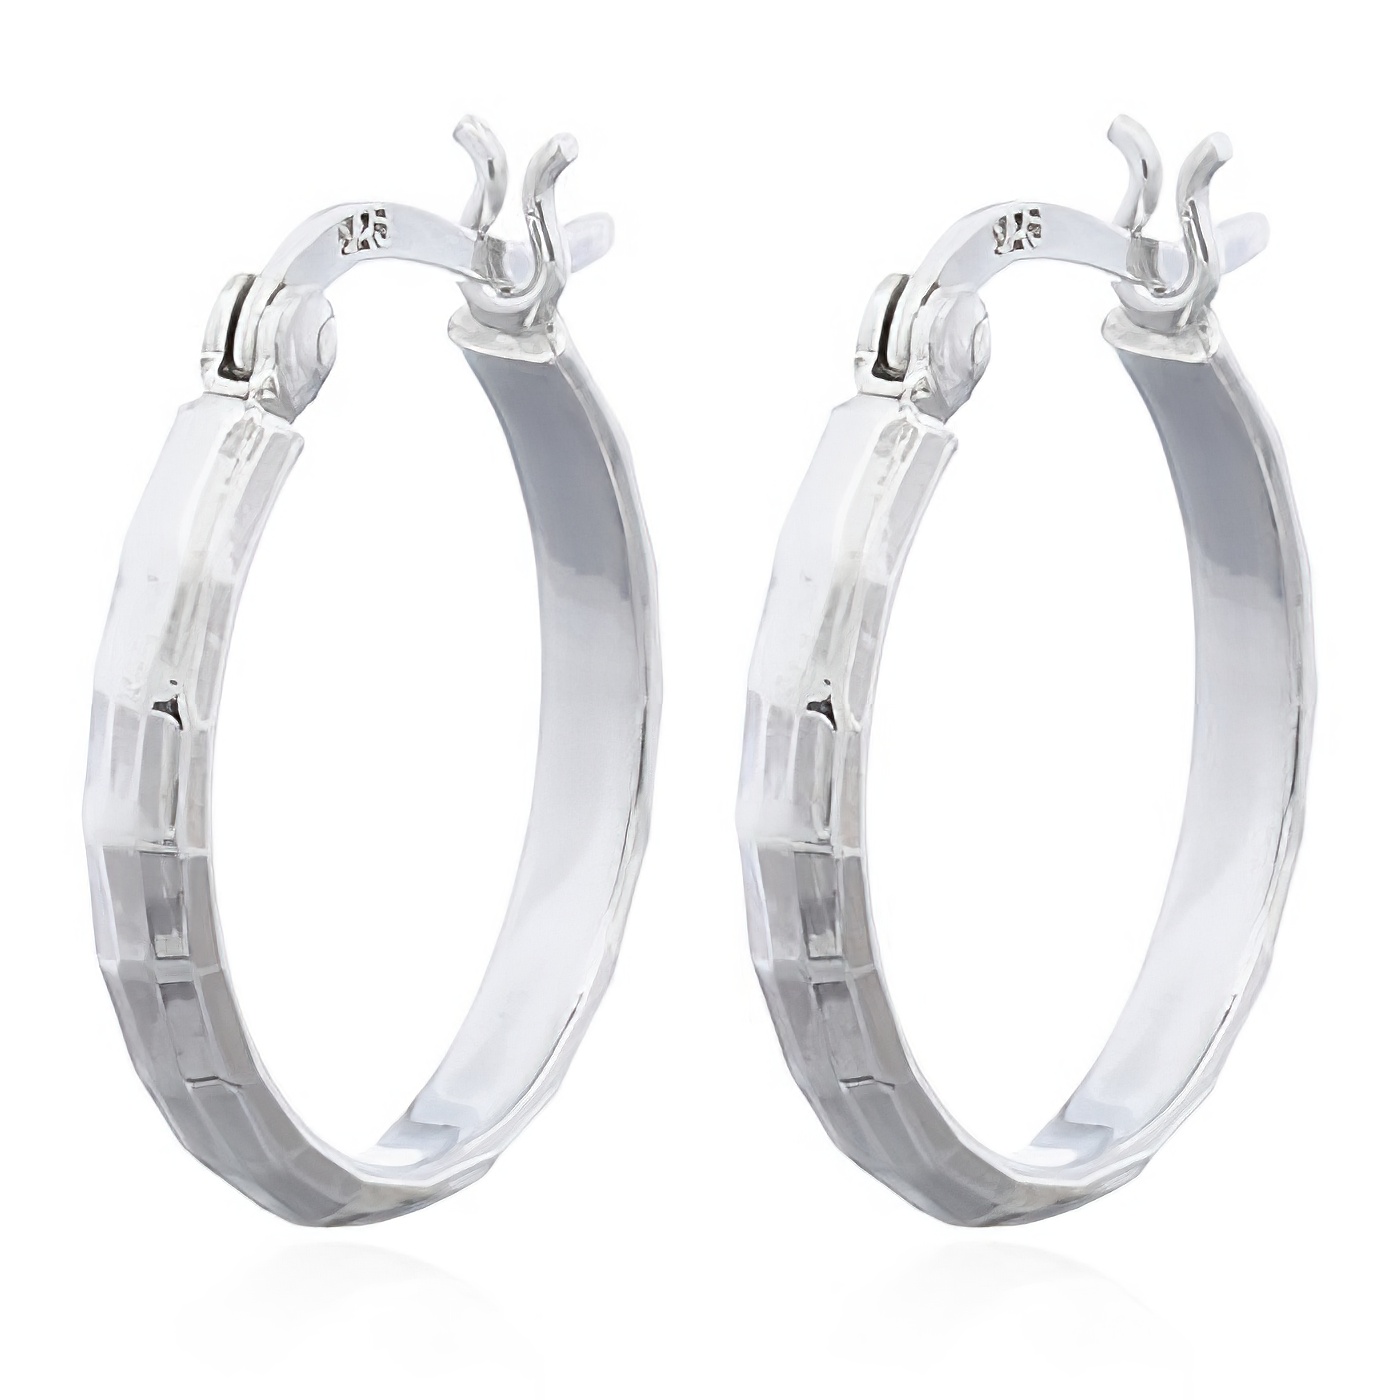 Sparkling Faceted Surface On 20 mm Silver Hoop Earrings by BeYindi 